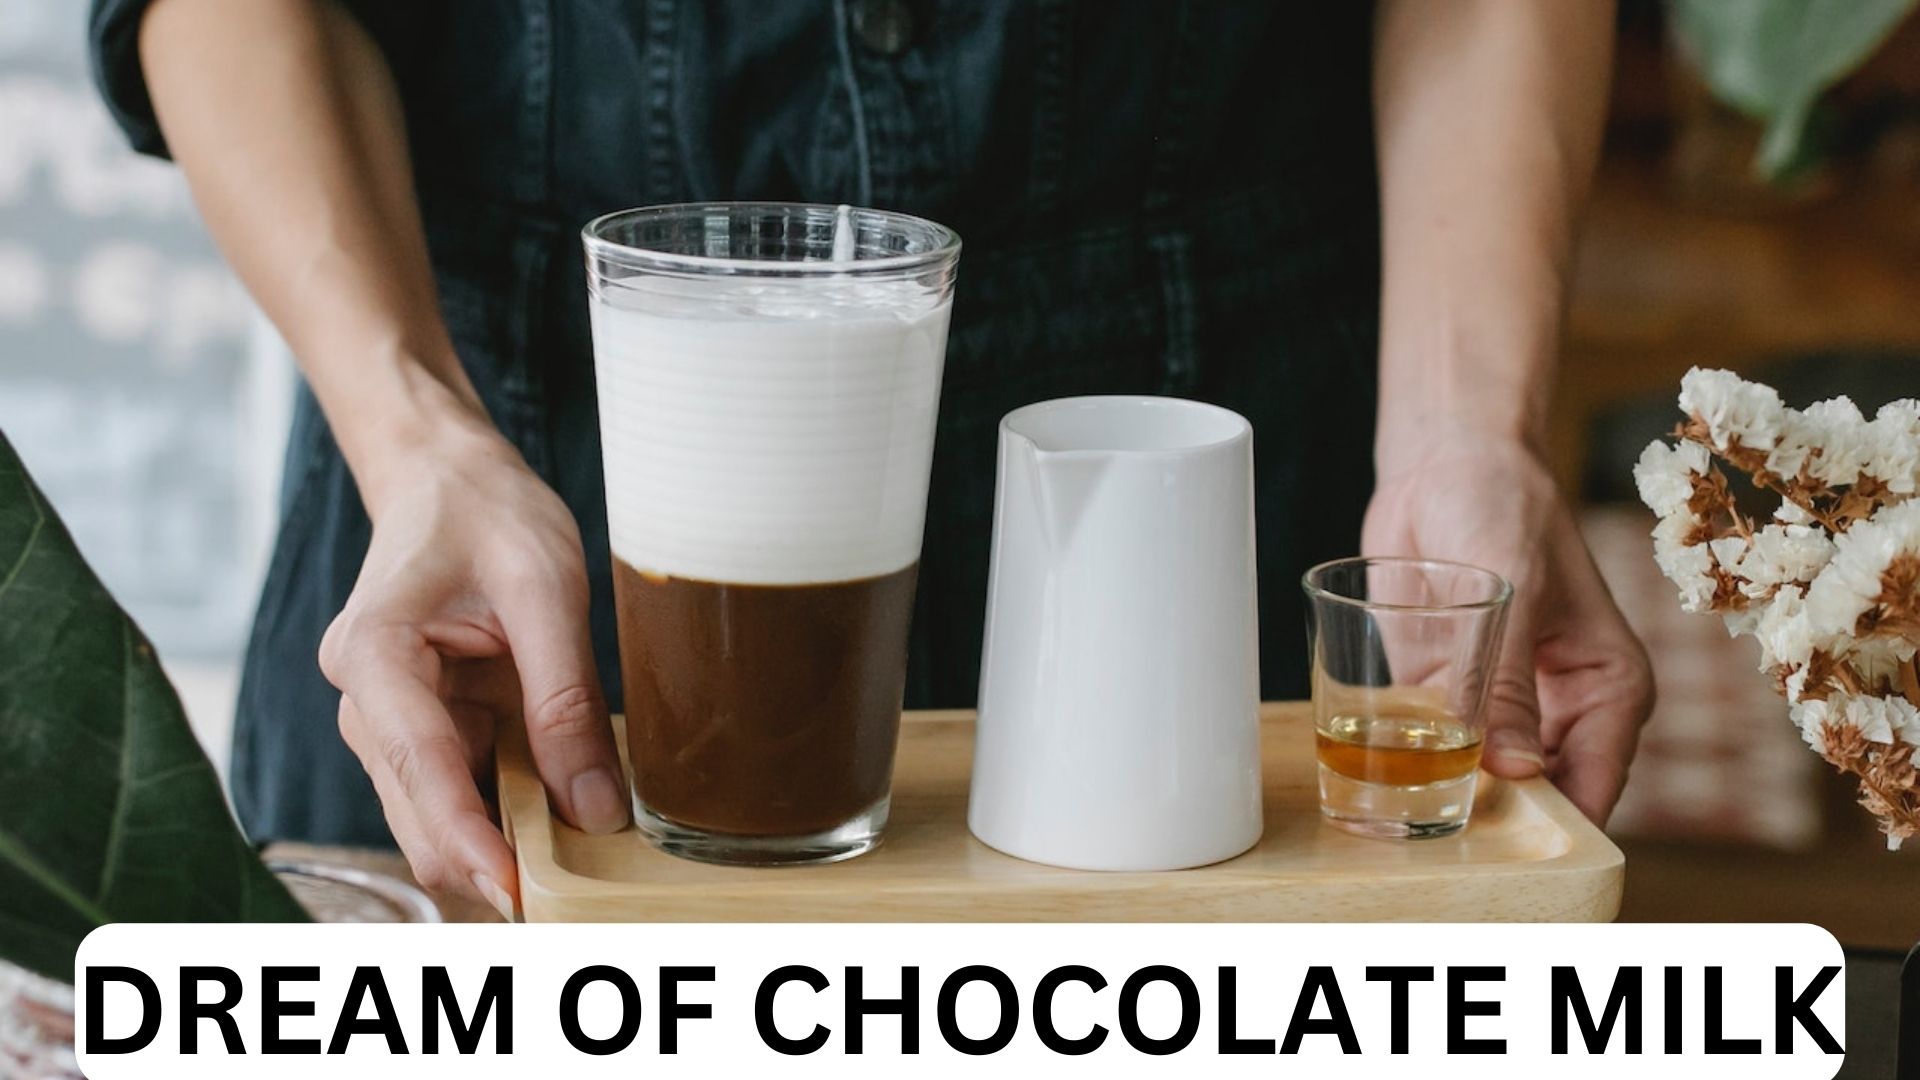 Dream Of Chocolate Milk - A Symbol For Lust, Love And Eroticism